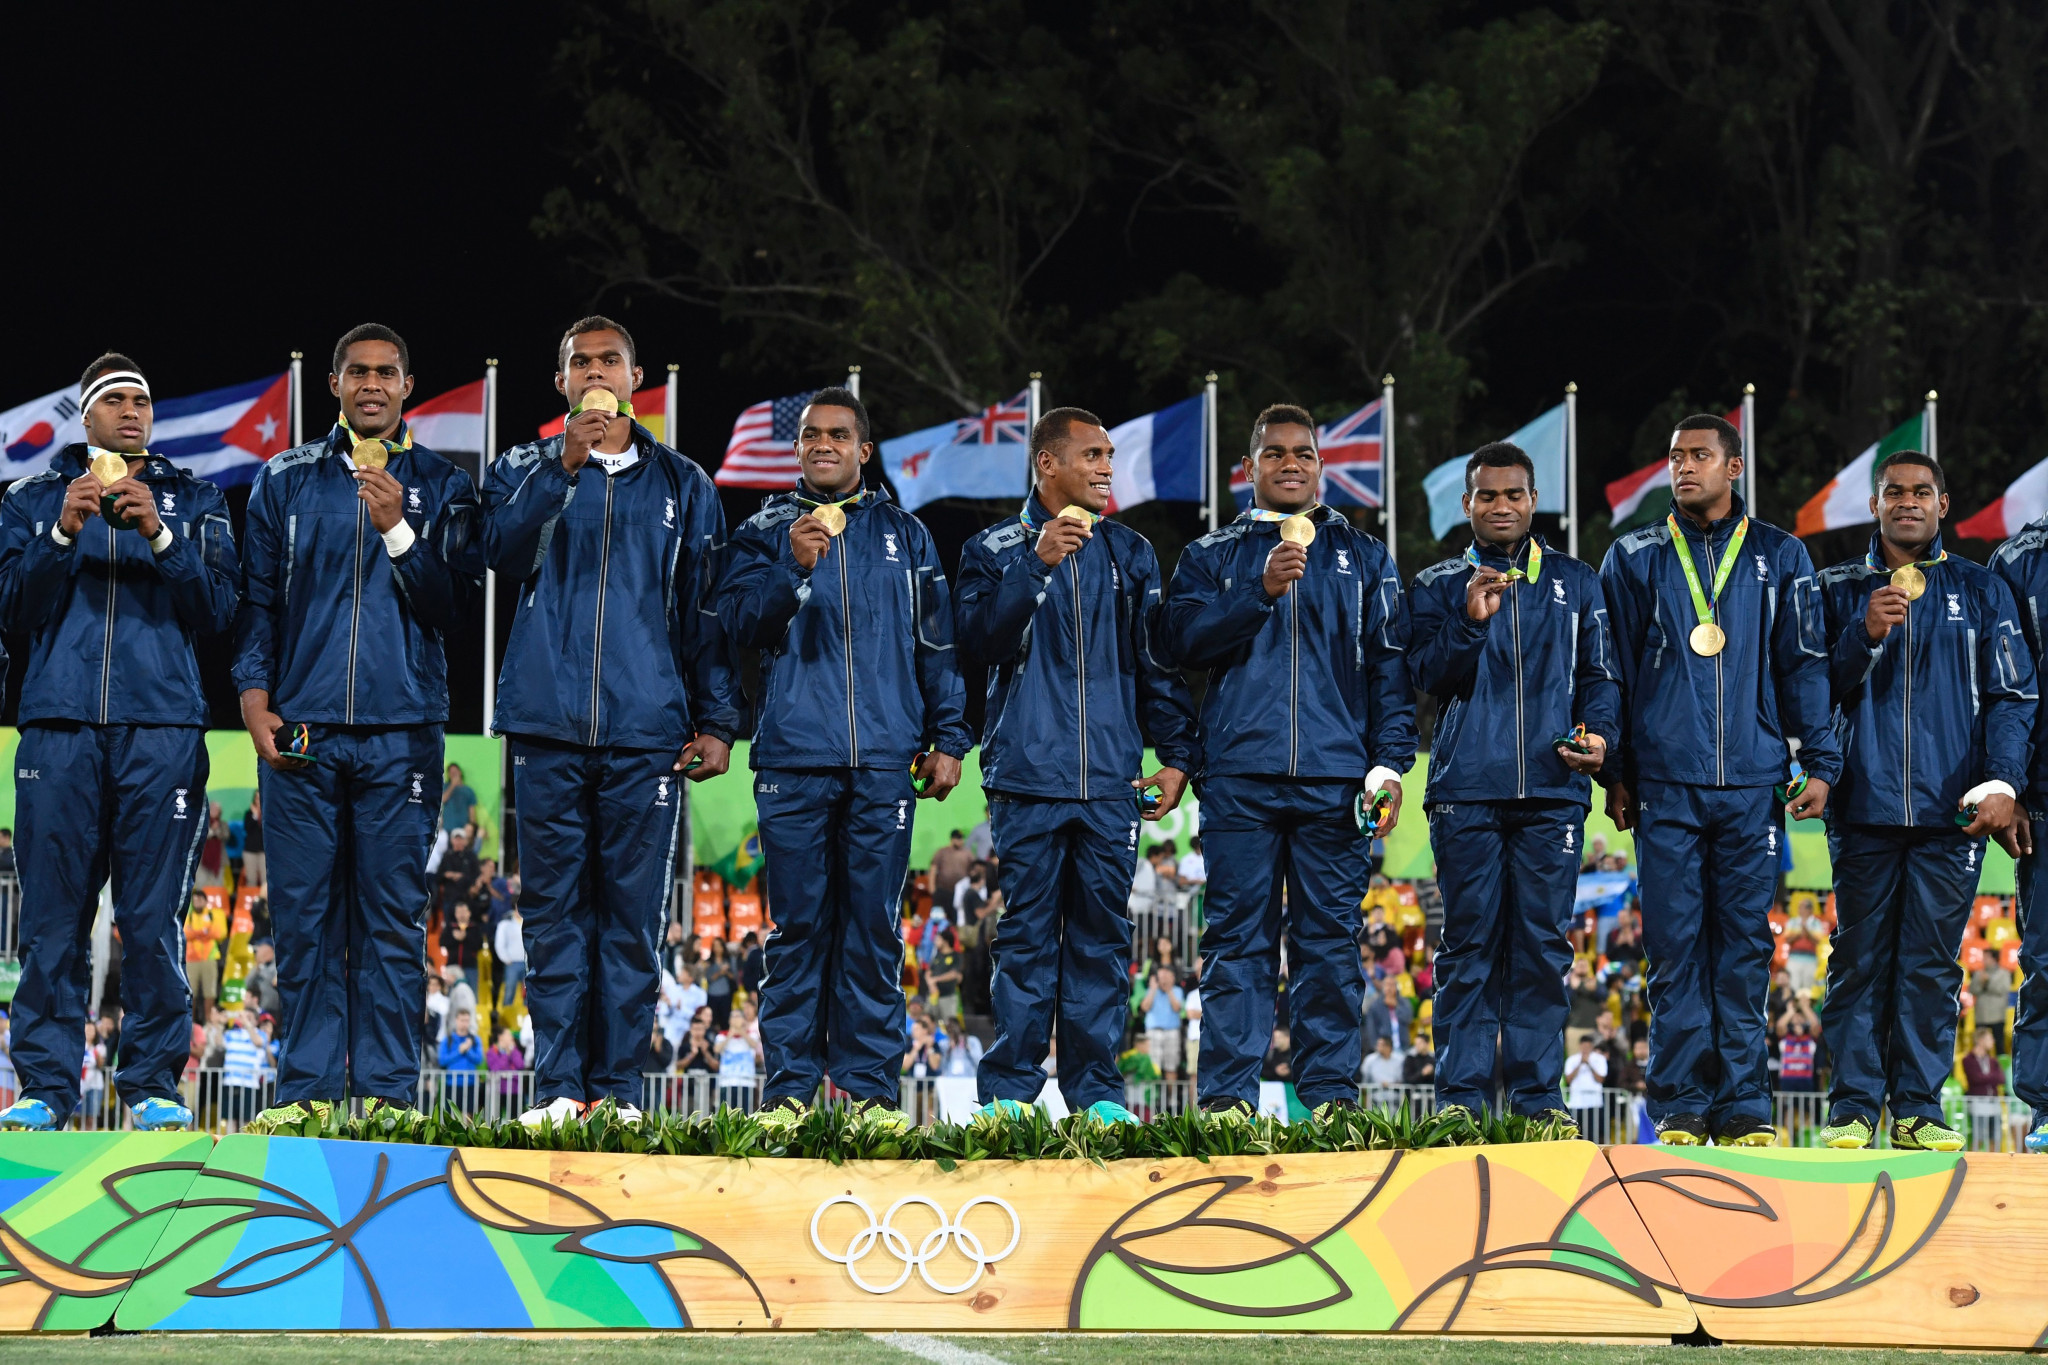 The men's rugby sevens team earned Fiji's first-ever Olympic gold medal at Rio 2016 ©Getty Images